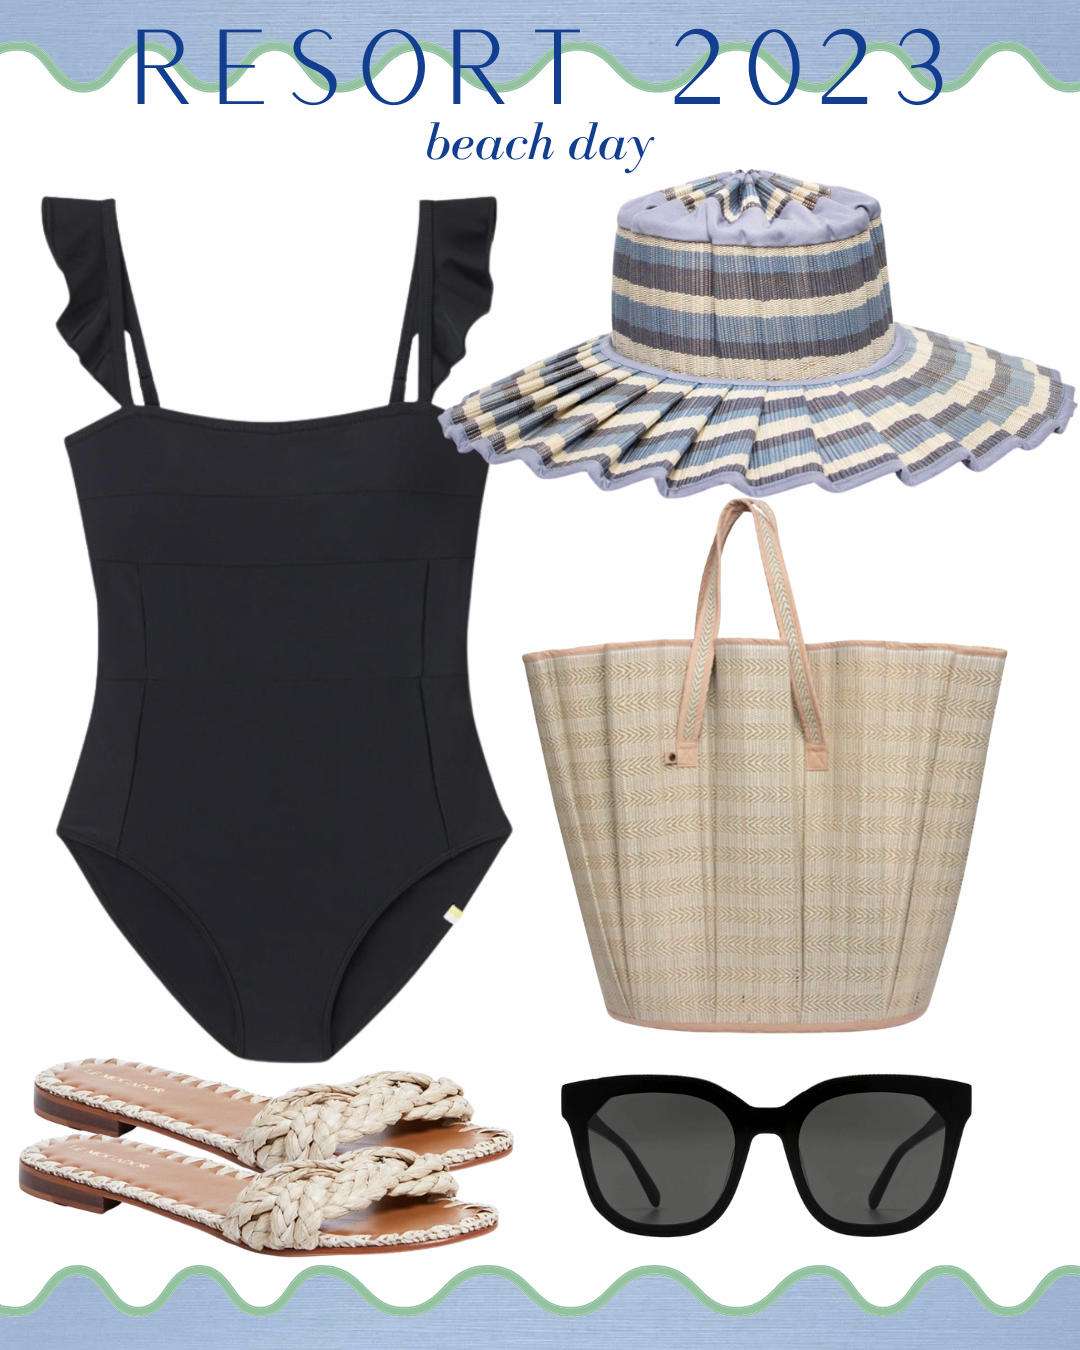 pool outfits 2023, pool vacation outfit ideas, pool outfit ideas 2023, what to pack for a beach vacation, resort outfit ideas 2023, black one piece swimsuit, flattering black swimsuit, blue striped sun hat, blue lampshade hat, neutral woven tote bag, large neutral beach bag, neutral woven slide sandals, large black sunglasses for women 